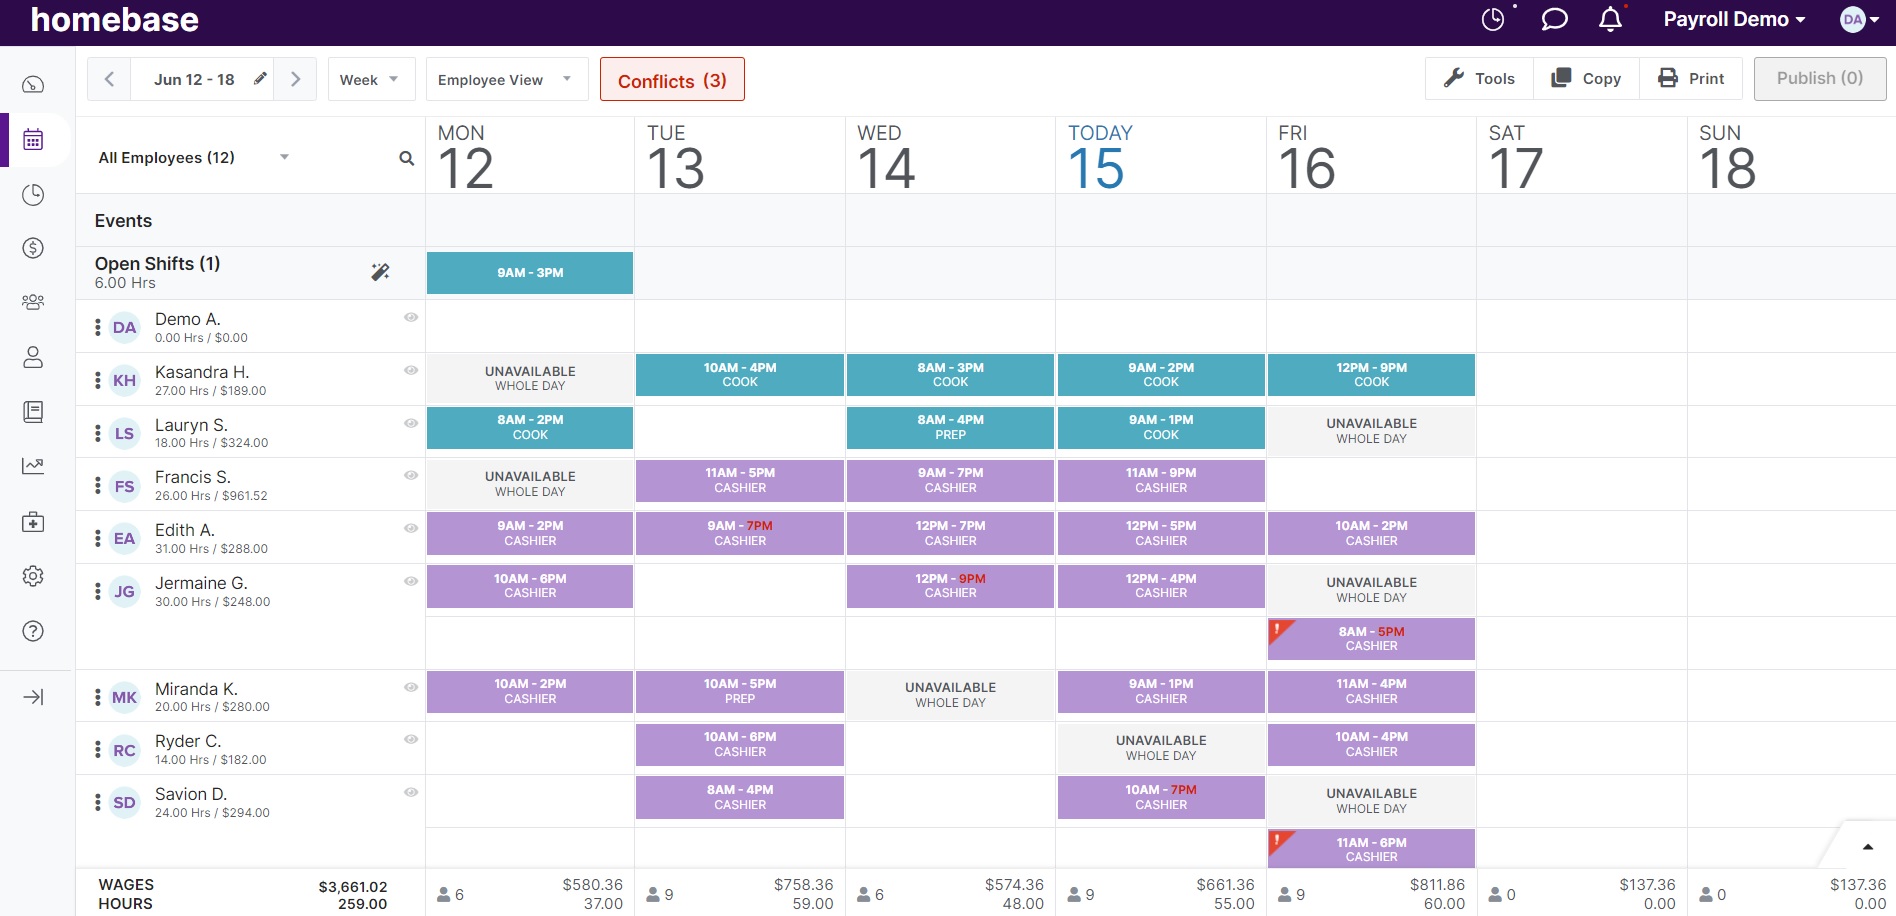 A view of Homebase’s scheduling tool.